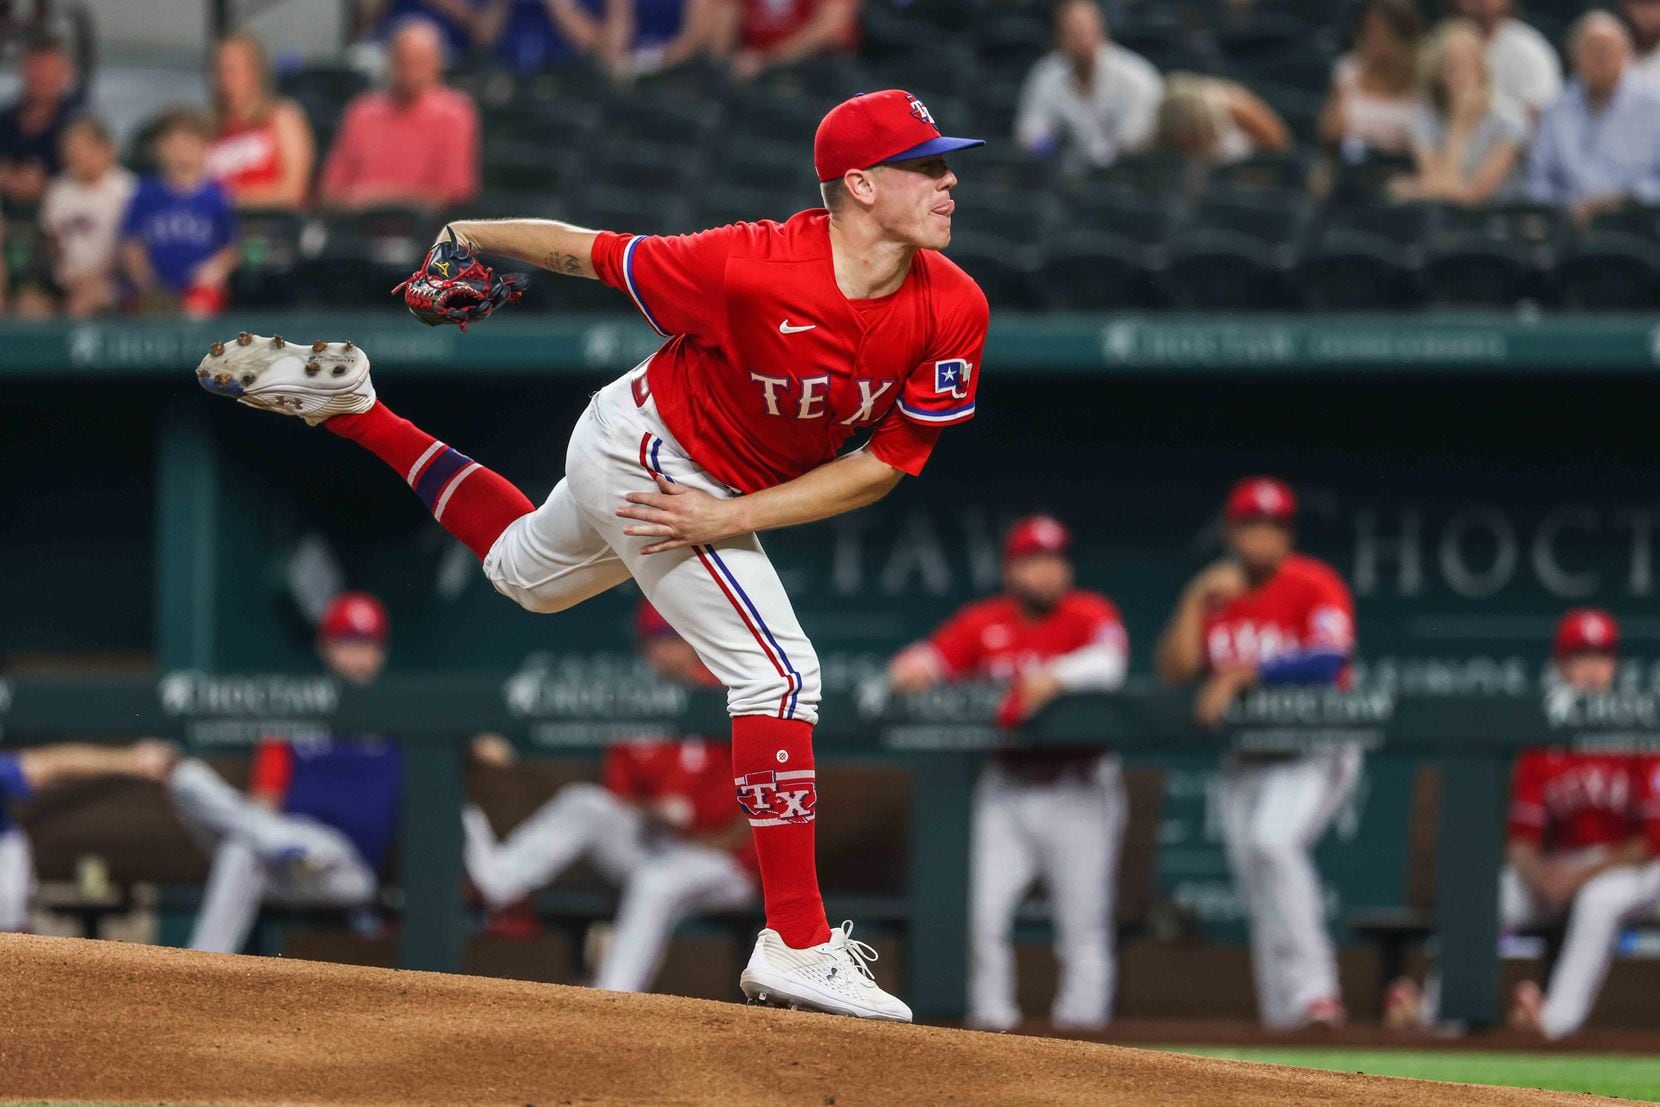 Texas Rangers pitcher Kolby Allard (39) throws during the first inning against the Seattle Mariners at Globe Life Field in Arlington, Texas, Friday, July 30, 2021. (Lola Gomez/The Dallas Morning News)